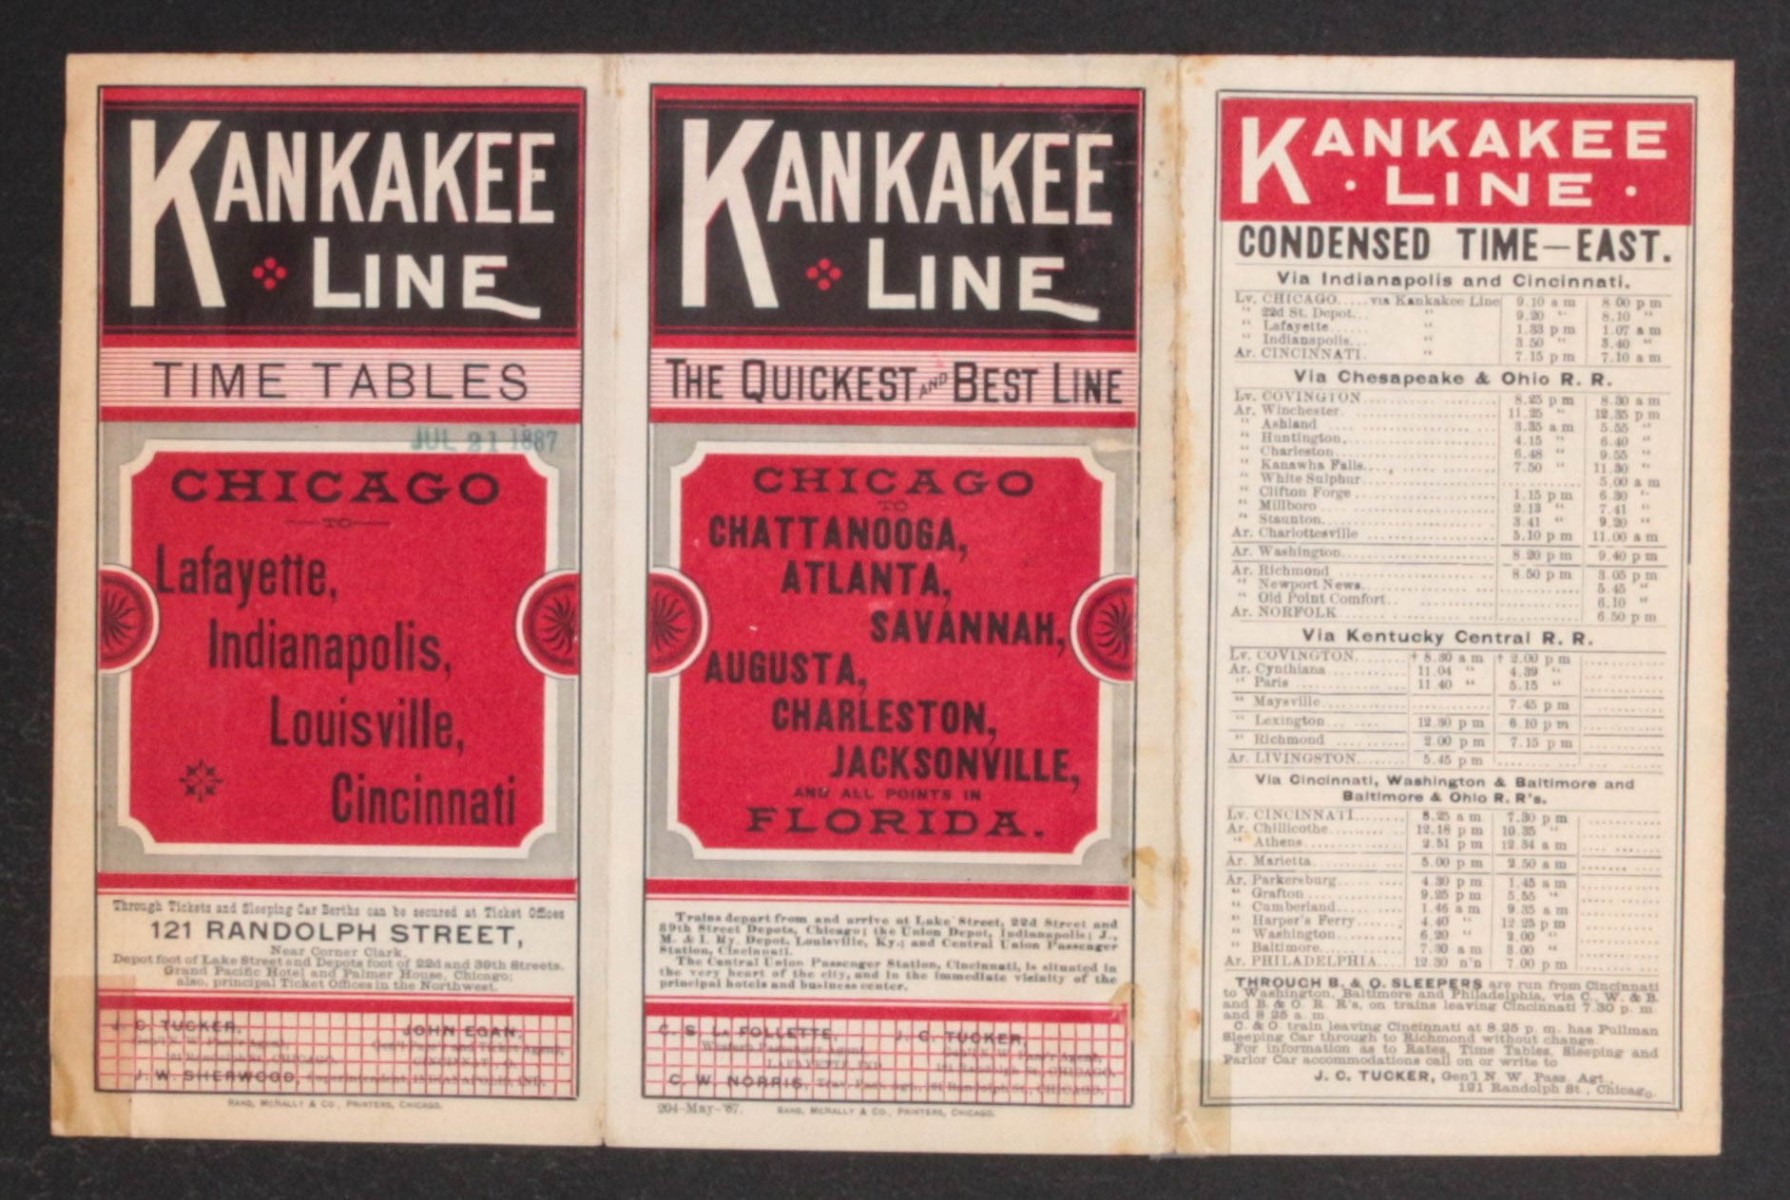 KANKAKEE LINE TIMETABLE FOR 1887